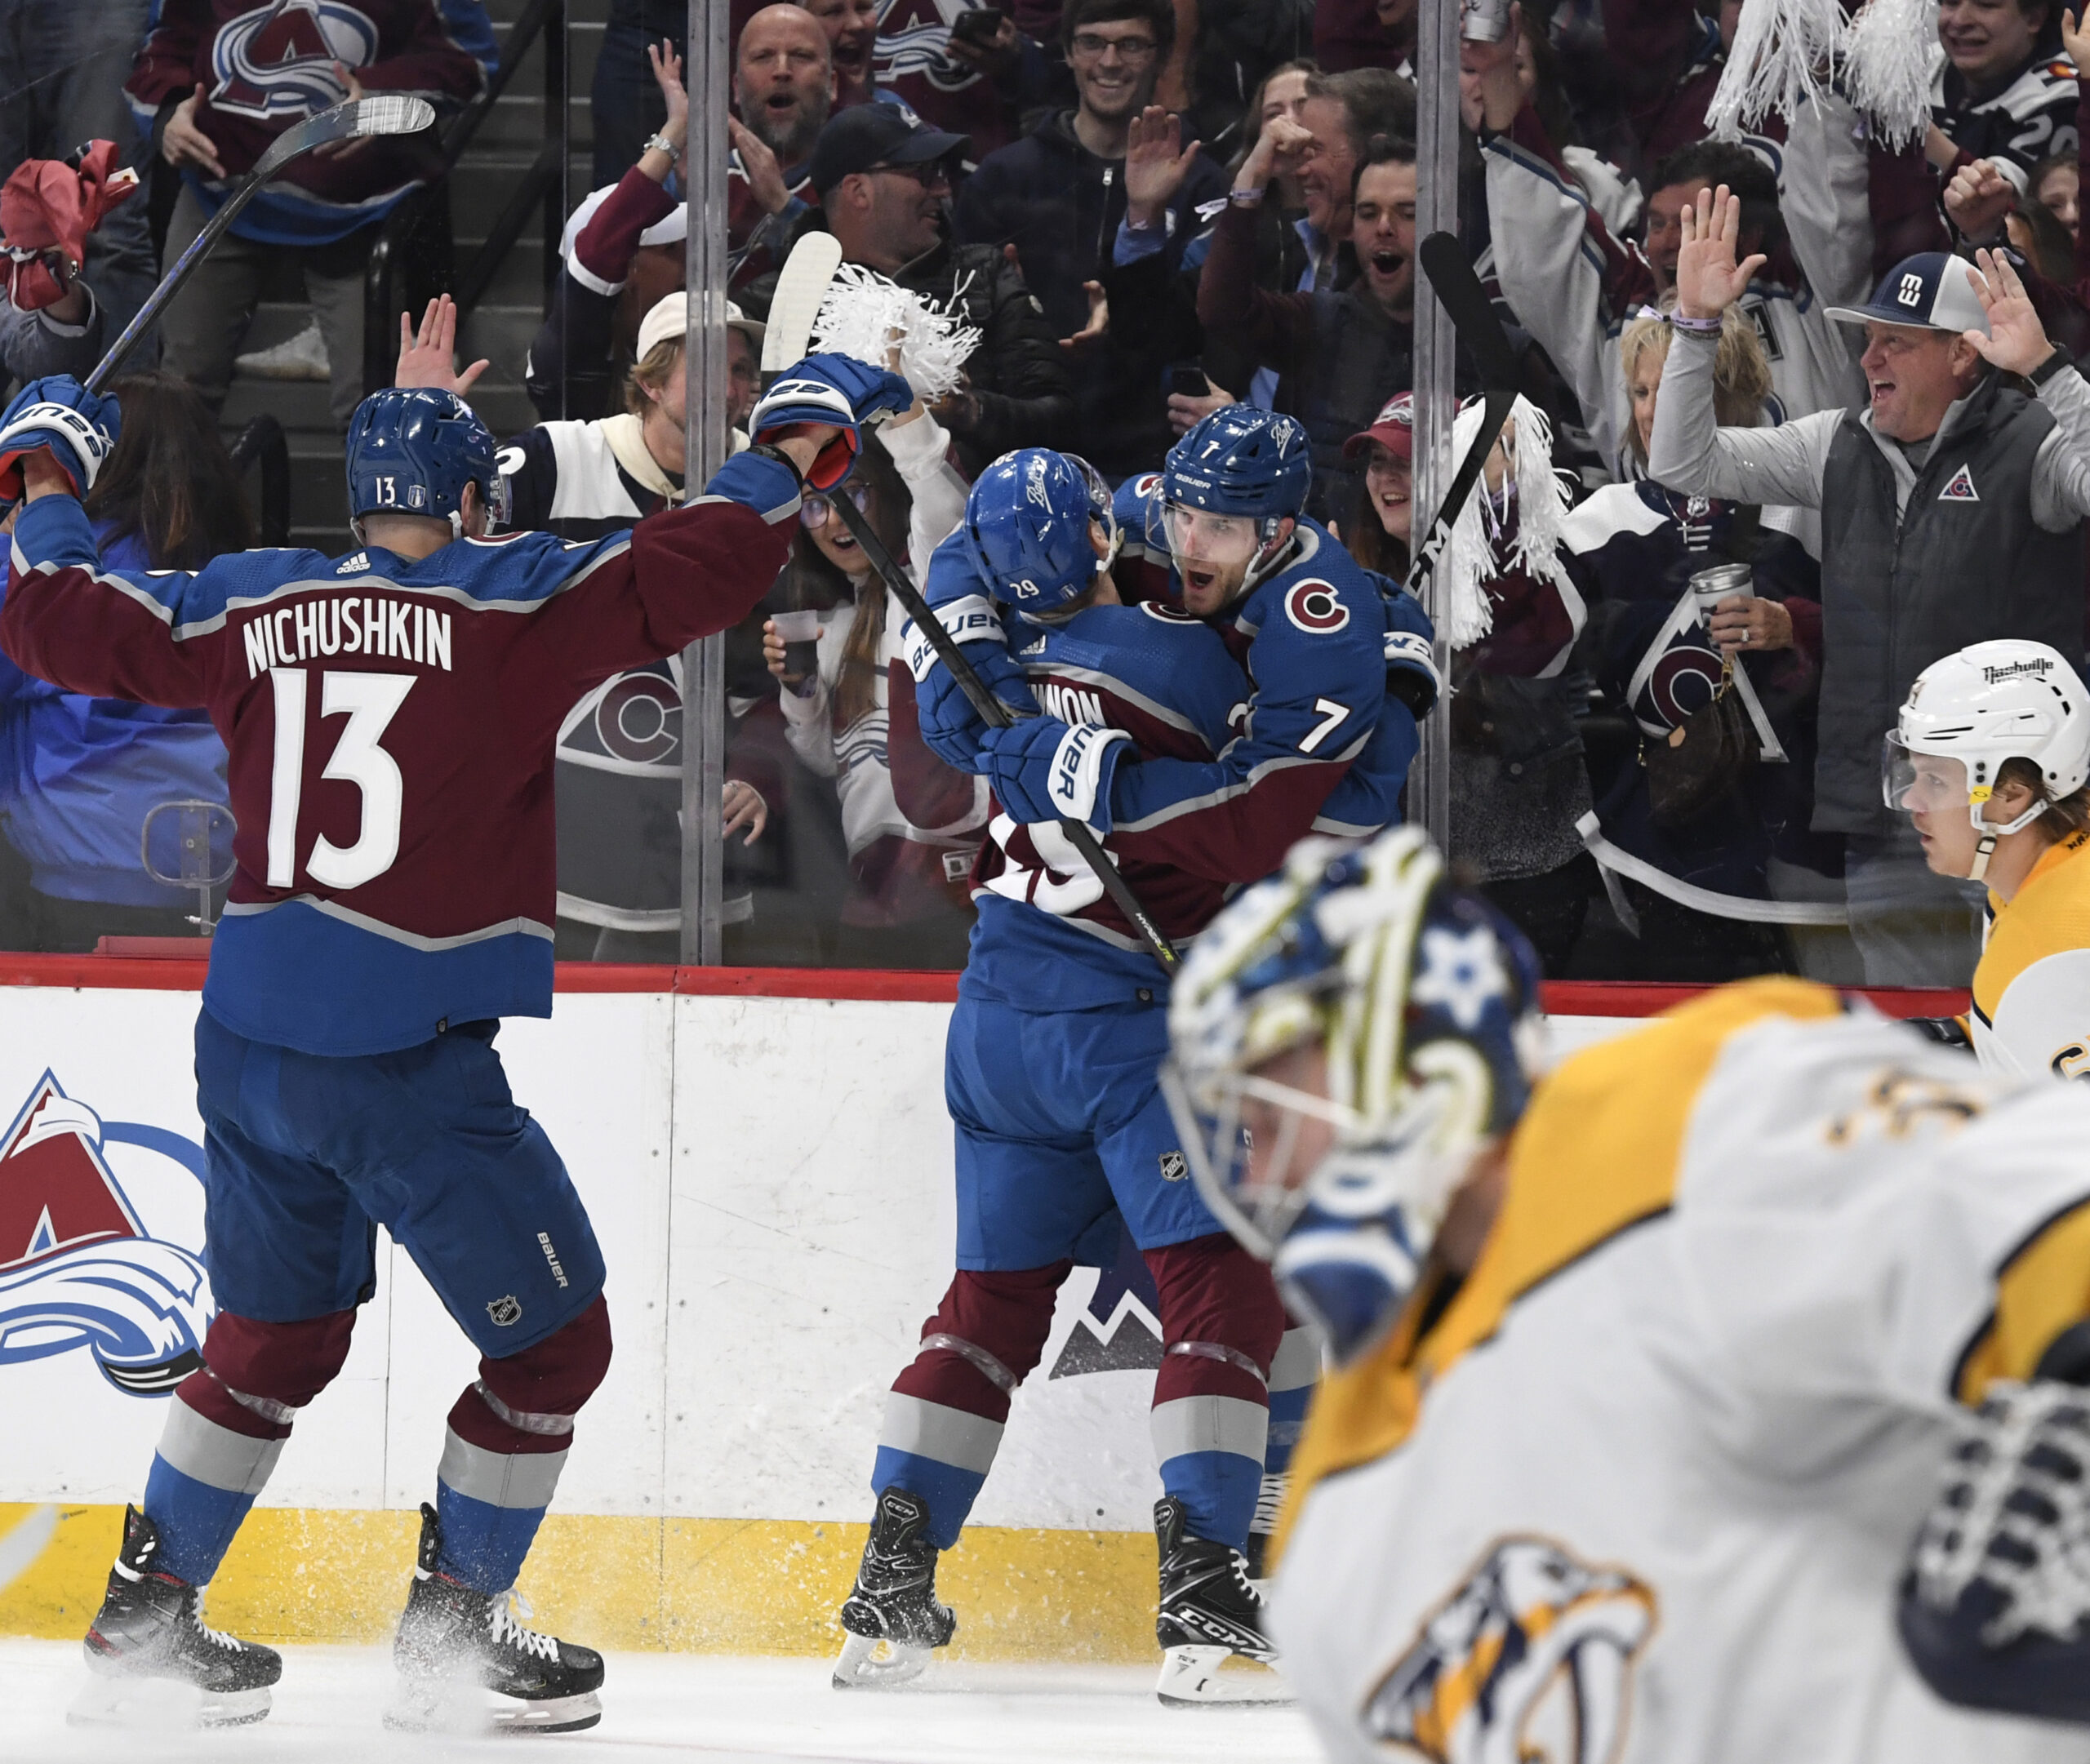 Important Dates For The 2023-24 Avalanche Season